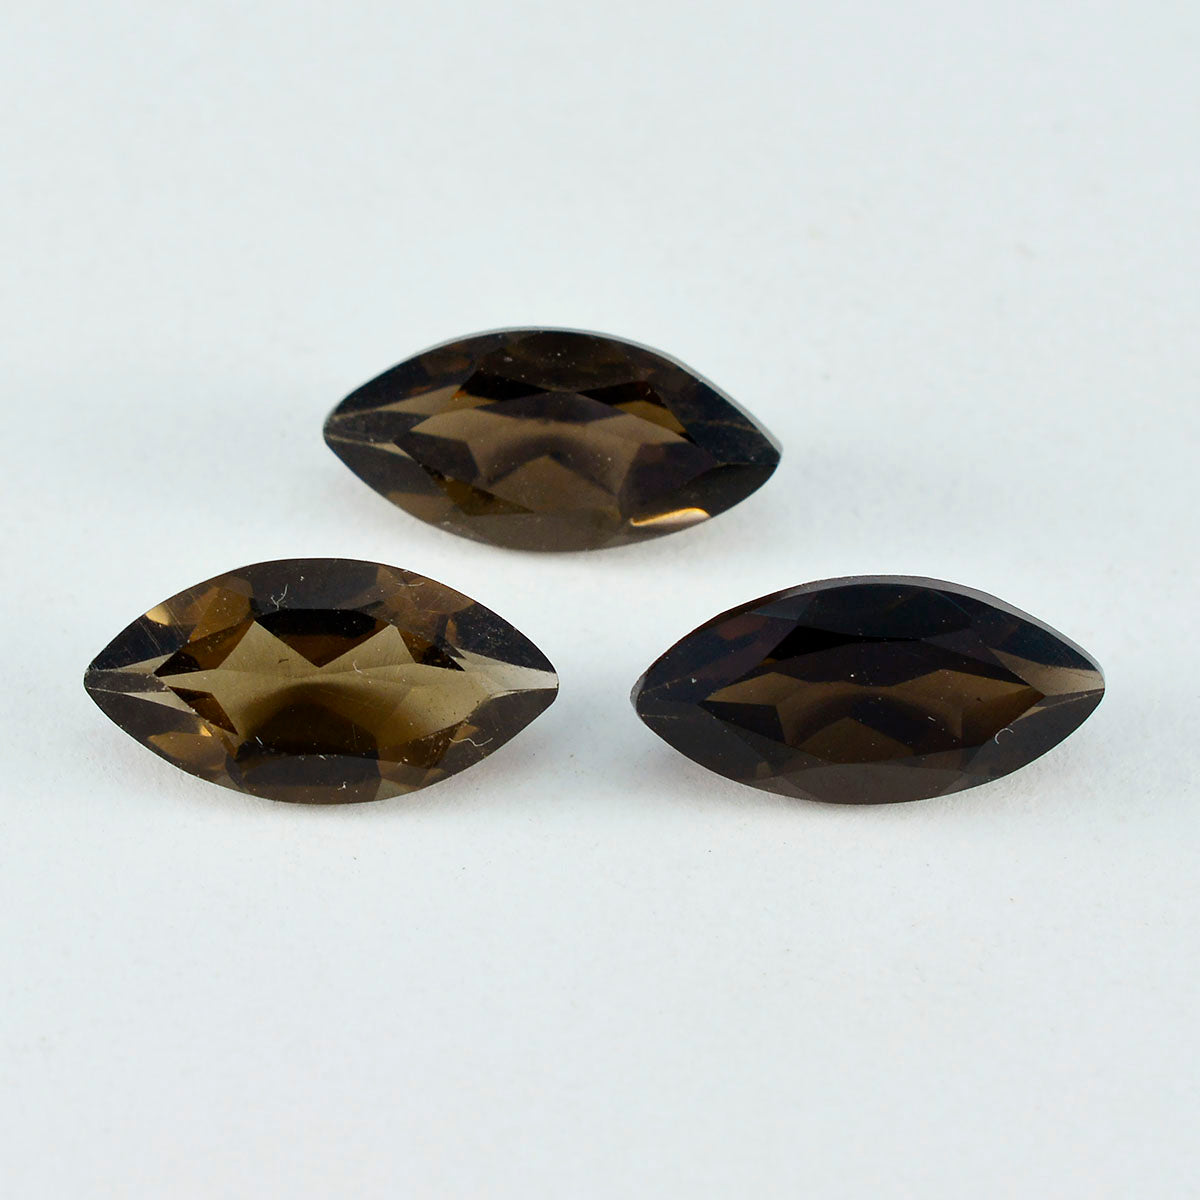 Riyogems 1PC Real Brown Smoky Quartz Faceted 7X14 mm Marquise Shape attractive Quality Loose Gem